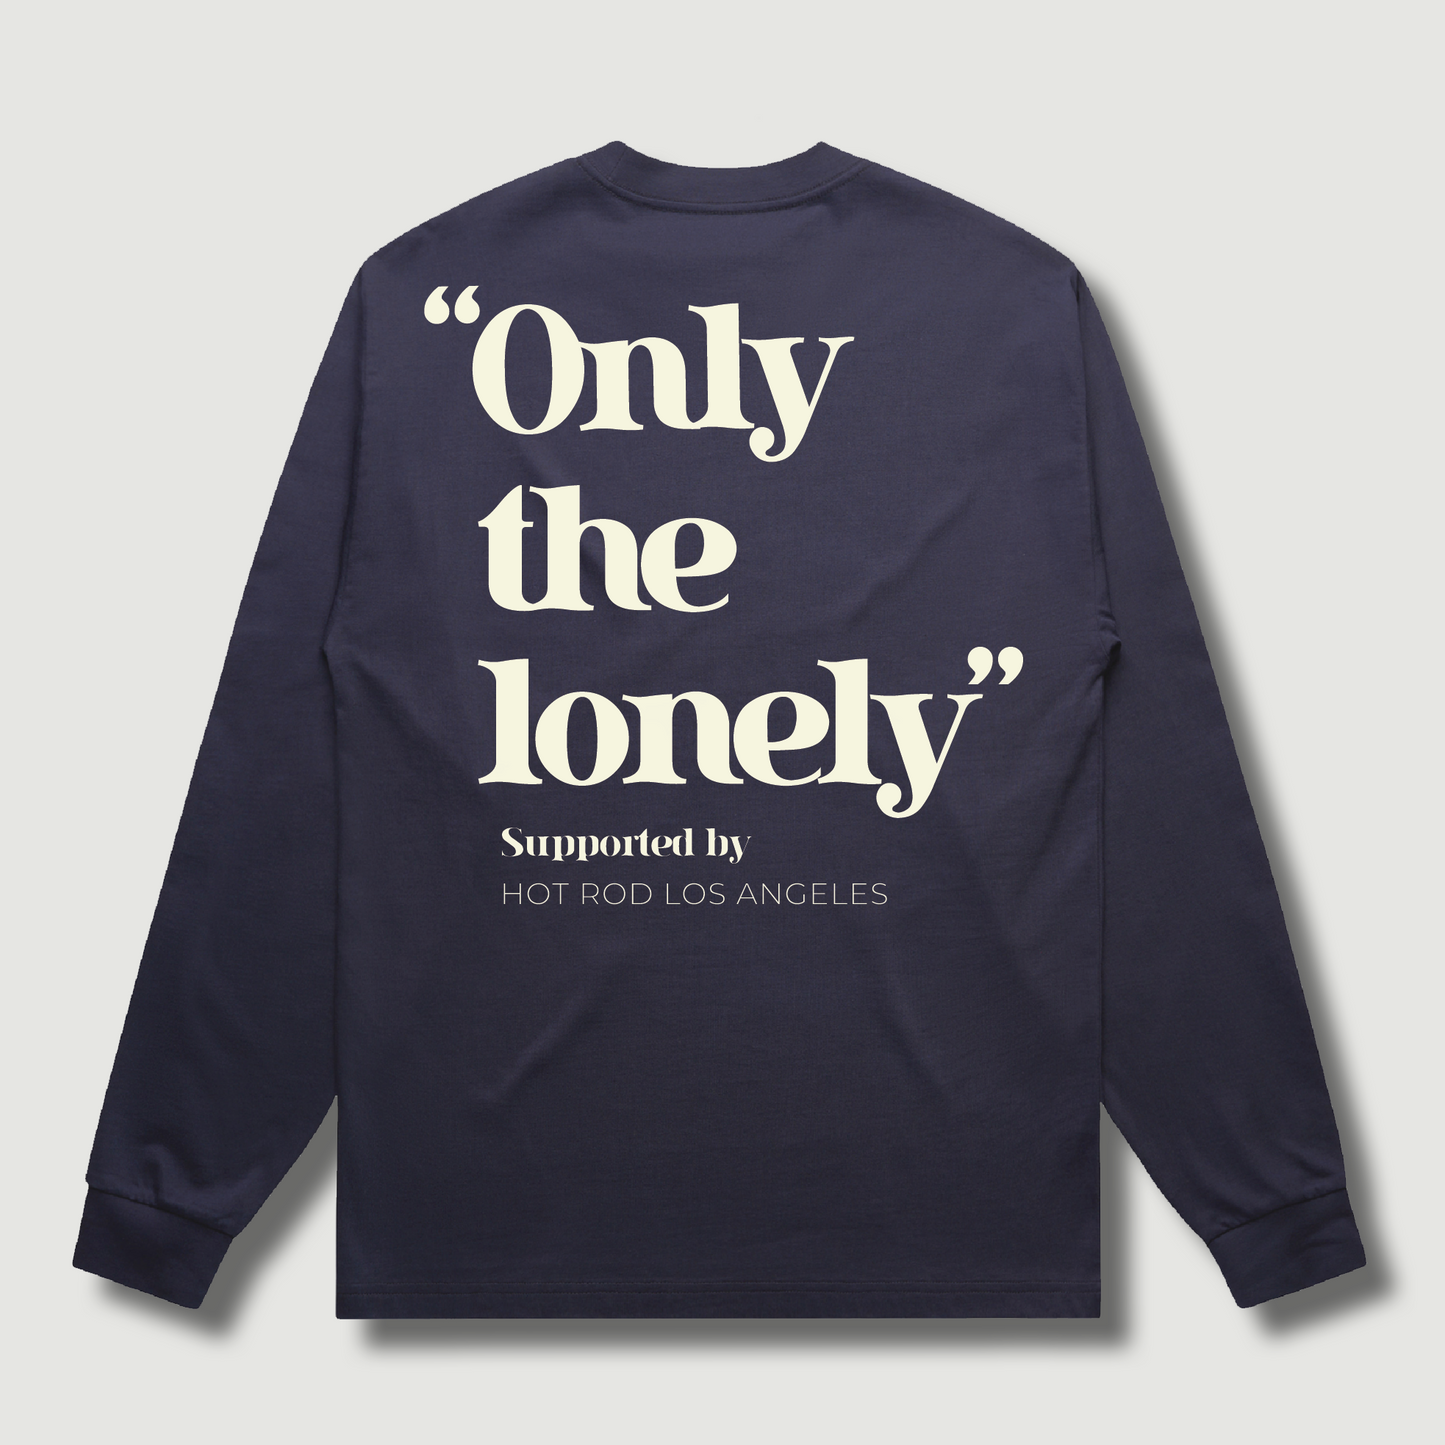 ONLY THE LONELY LOGO LONG SLEEVE T-SHIRT (NAVY/CREAM)